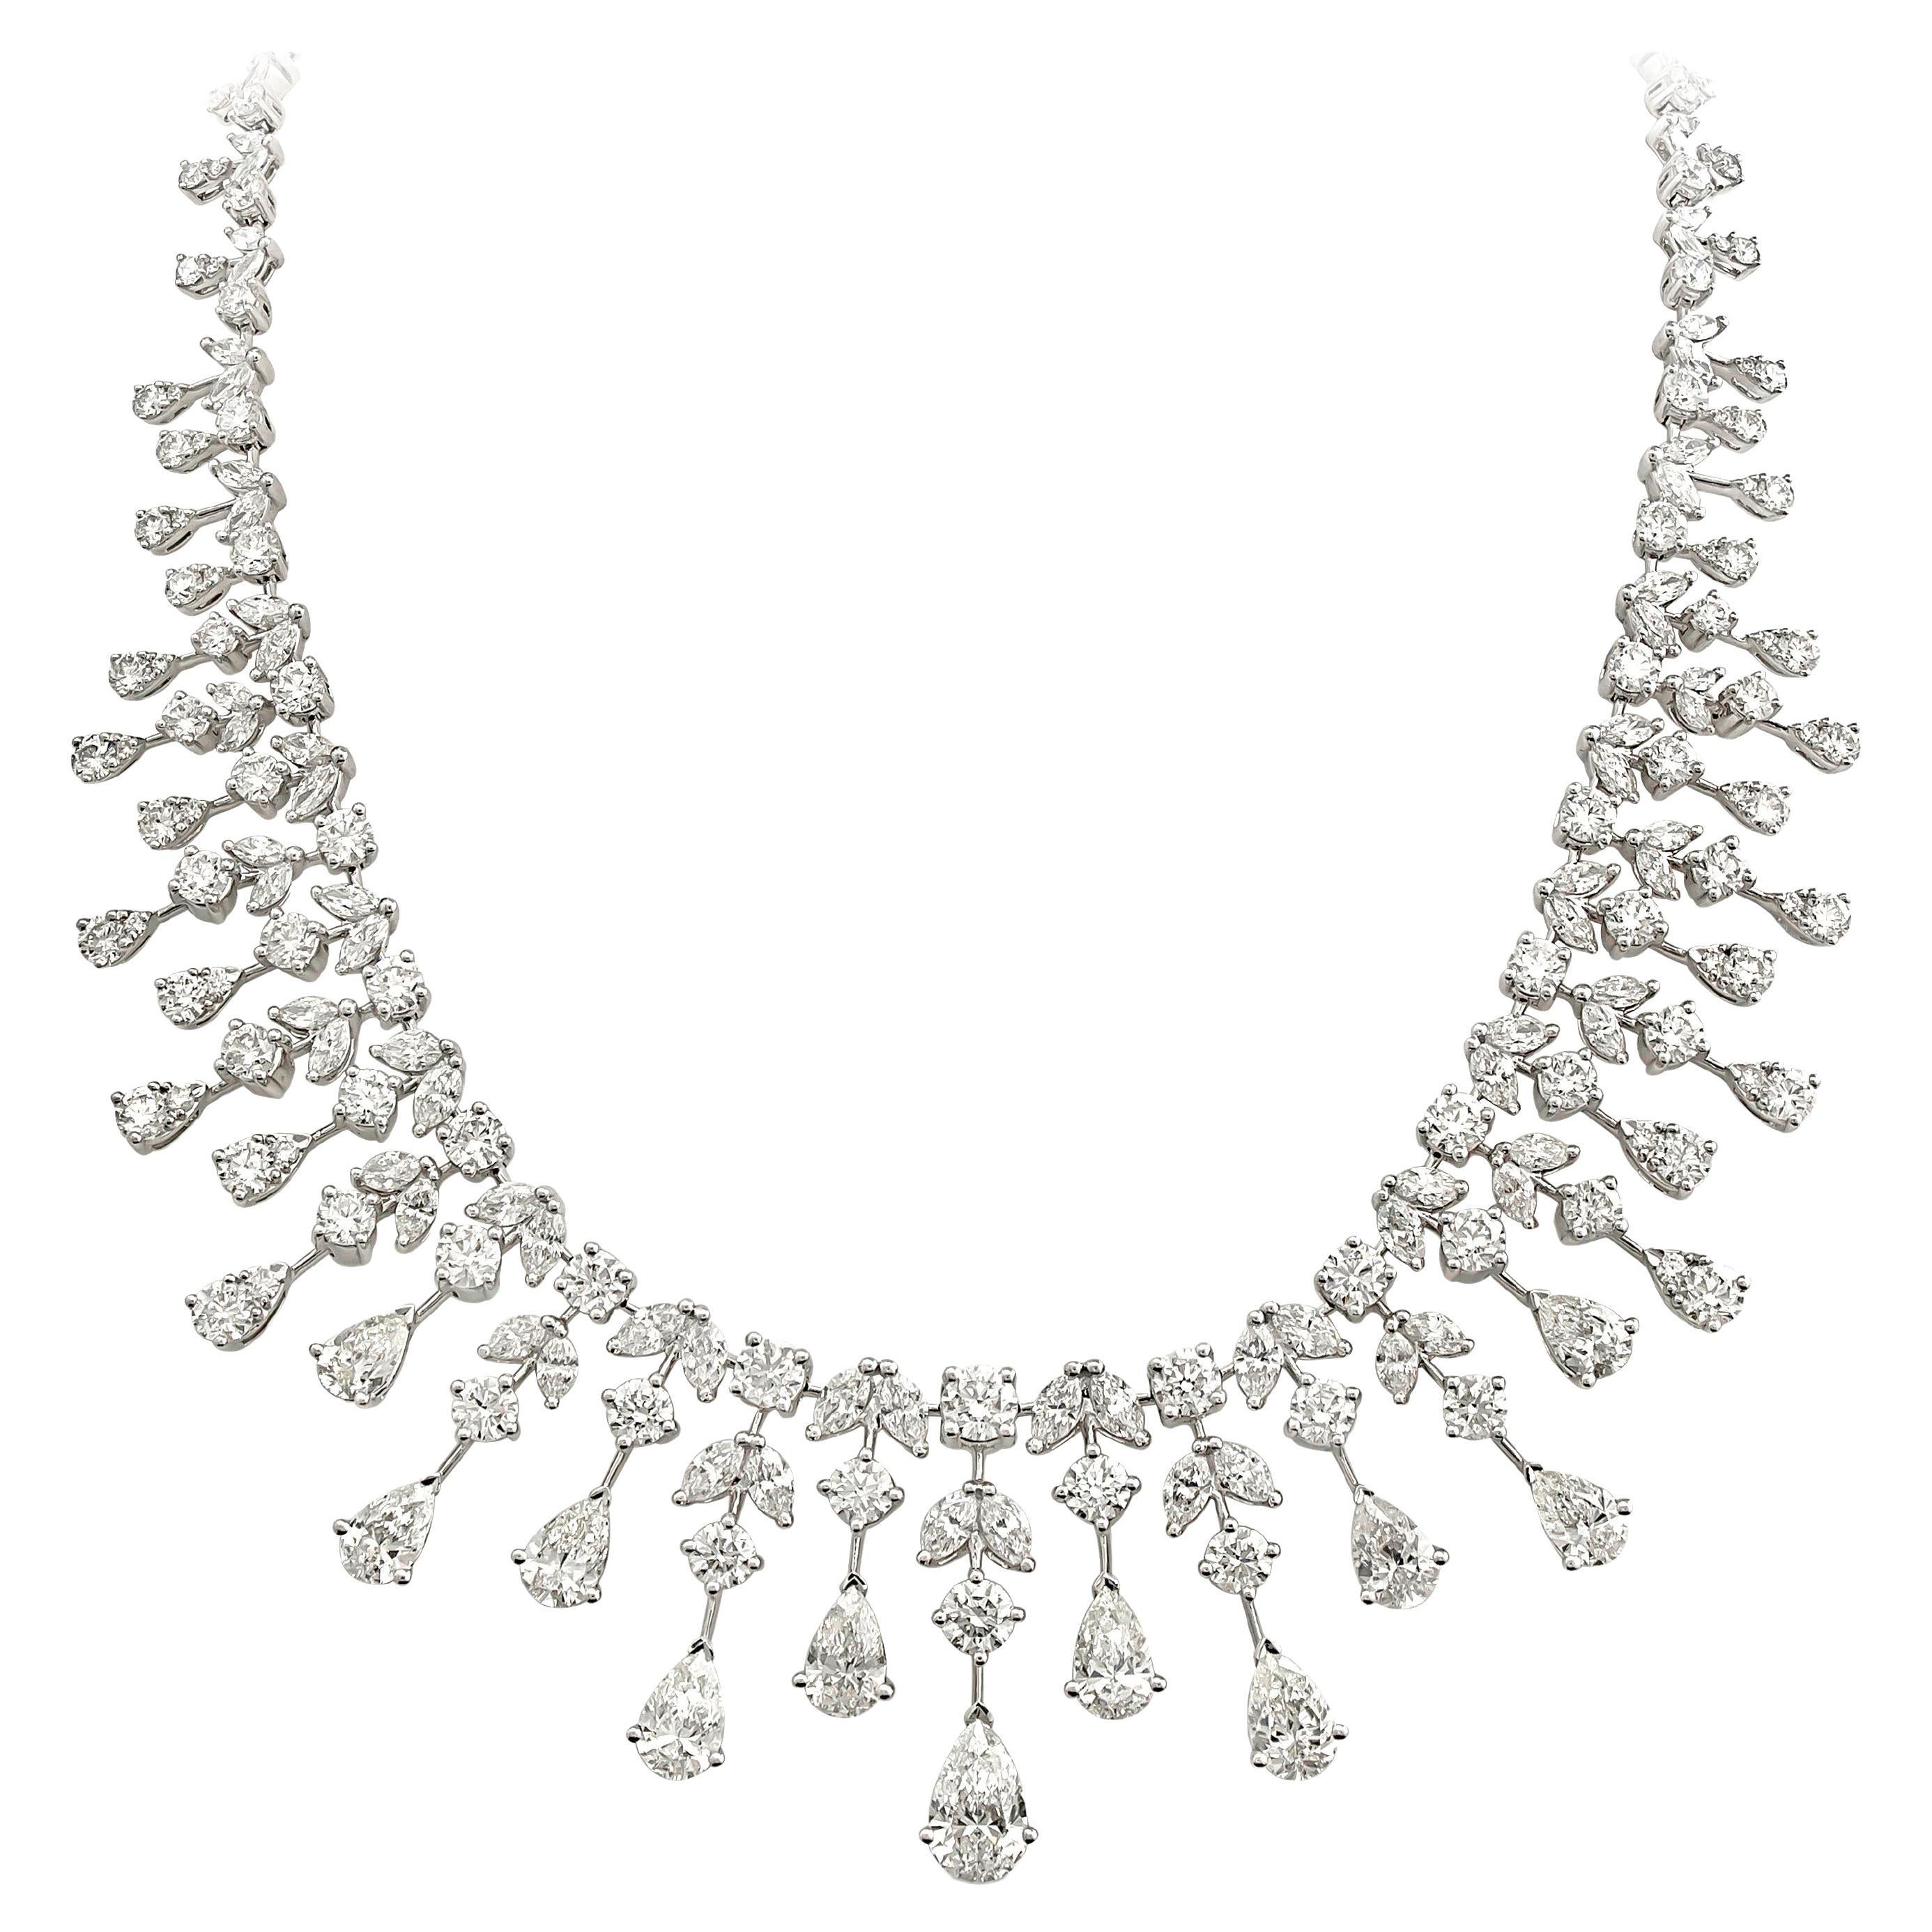 A luxurious and elegantly made diamond chandelier necklace, showcasing 276 brilliant pieces of mixed cut (round, pear, and marquise) diamonds weighing 37.20 carats total. Set on an 18K white gold graduating chandelier diamond drop design. Five pear